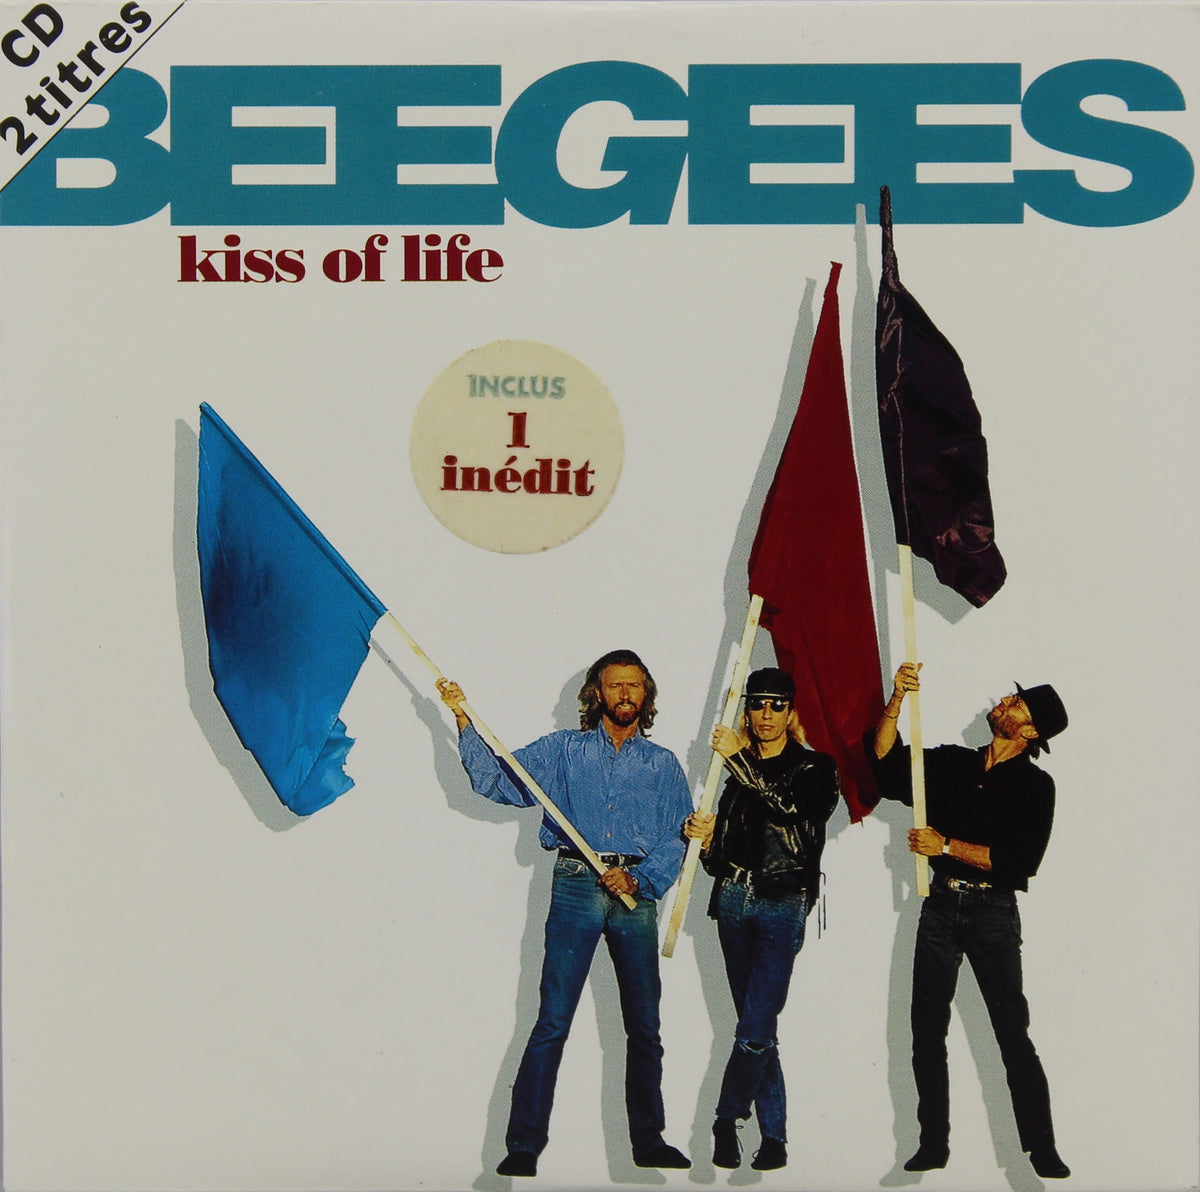 Bee Gees ‎– Kiss Of Life, CD, Single, France 1994